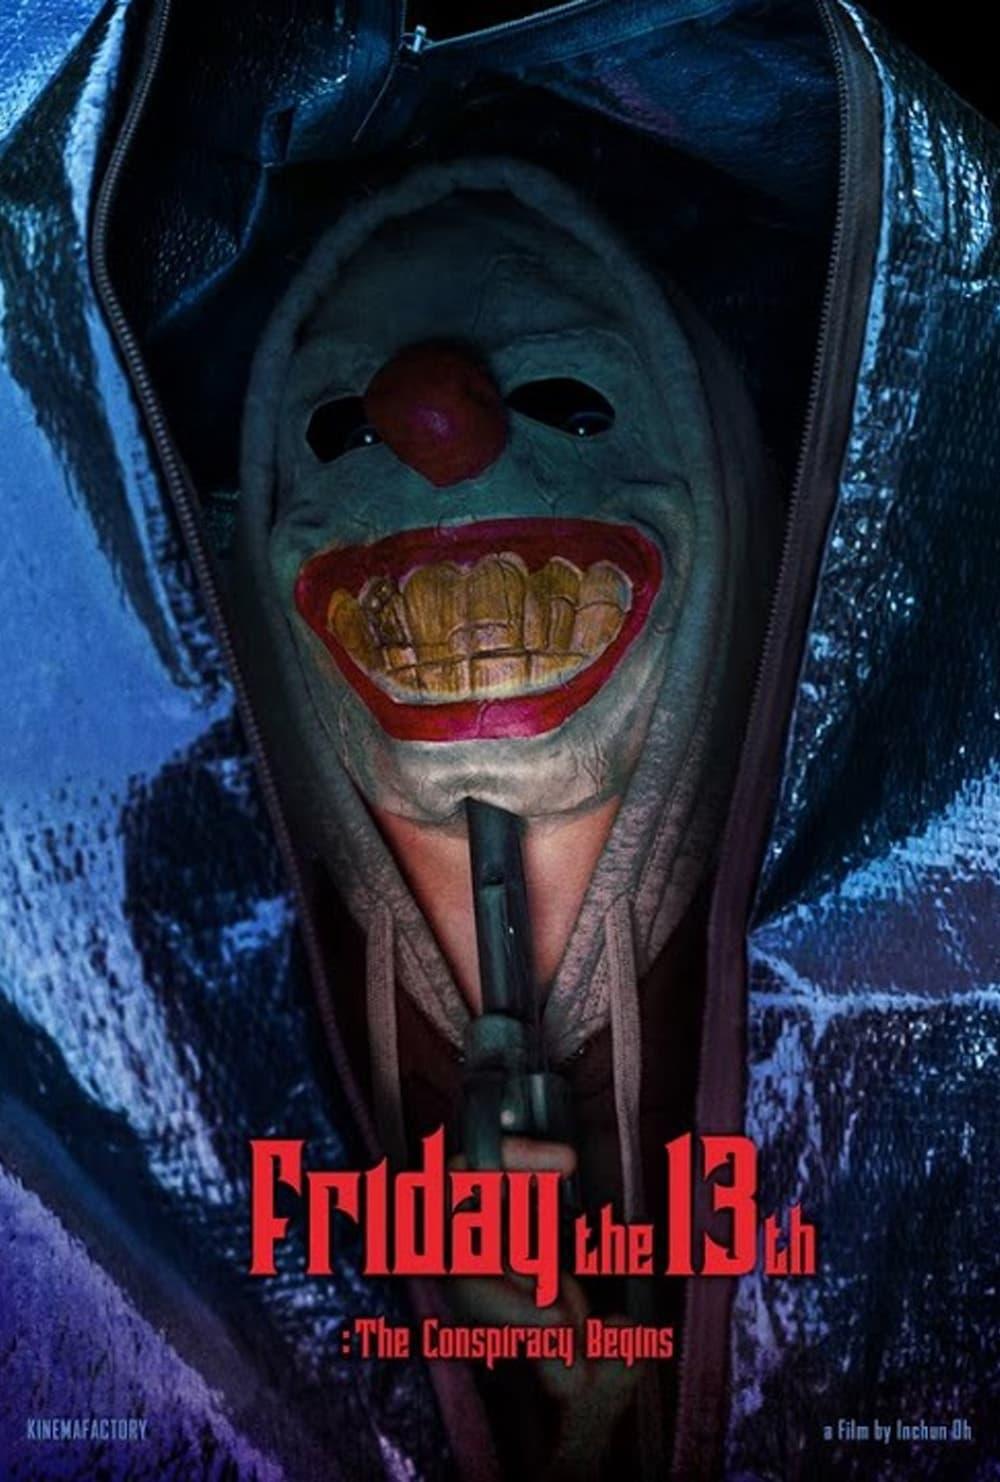 Friday the 13th : The Conspiracy Begins poster